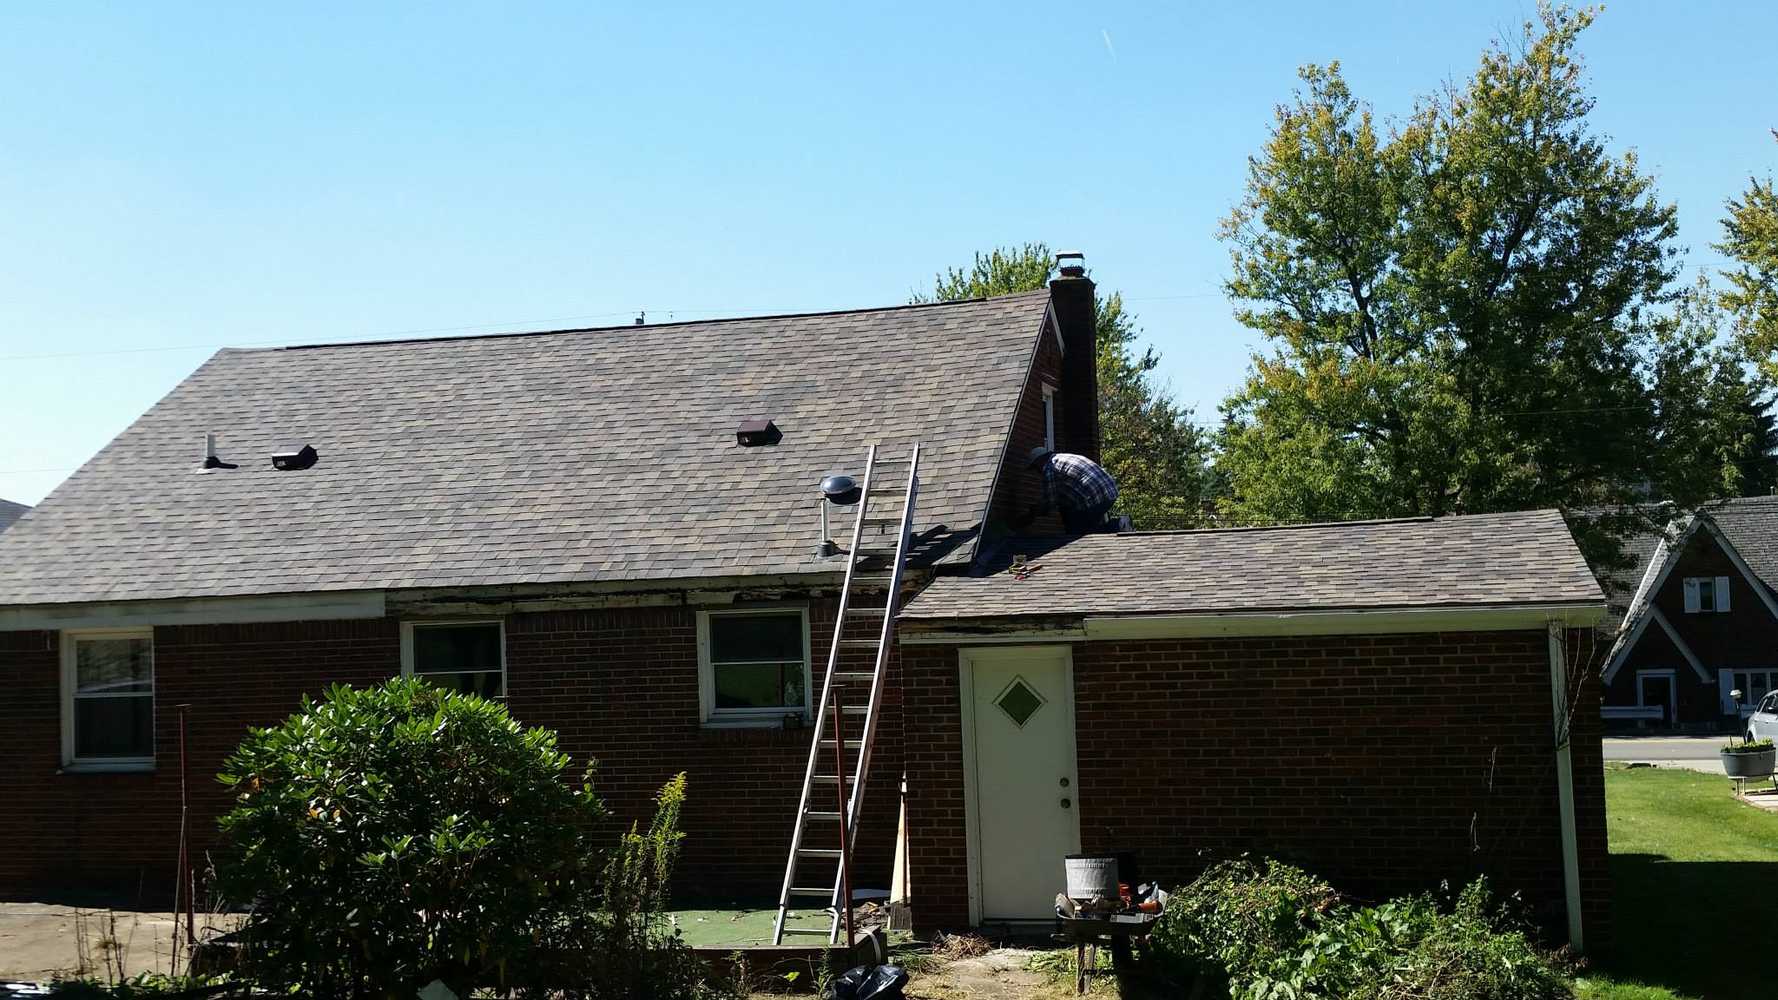 New Roof, Owens Corning Duration 